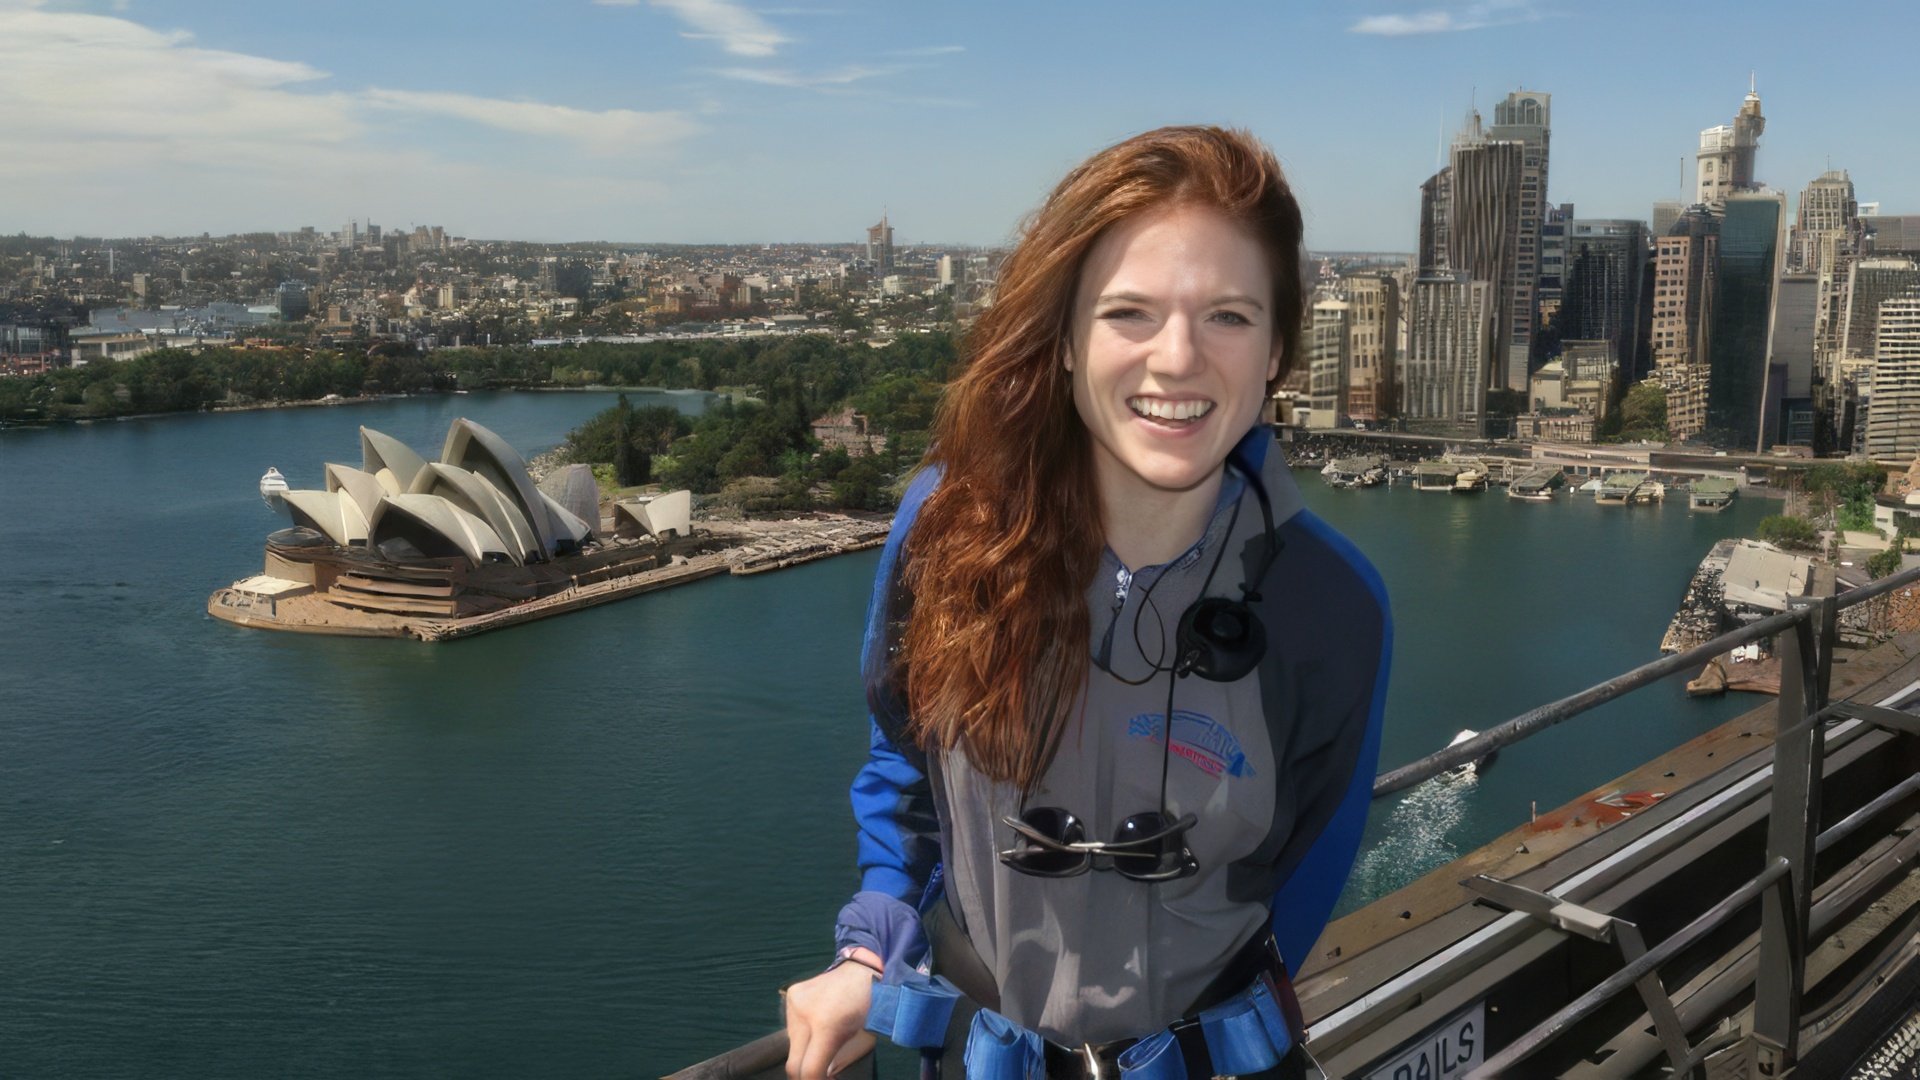 Actress Rose Leslie on vacation in Sydney